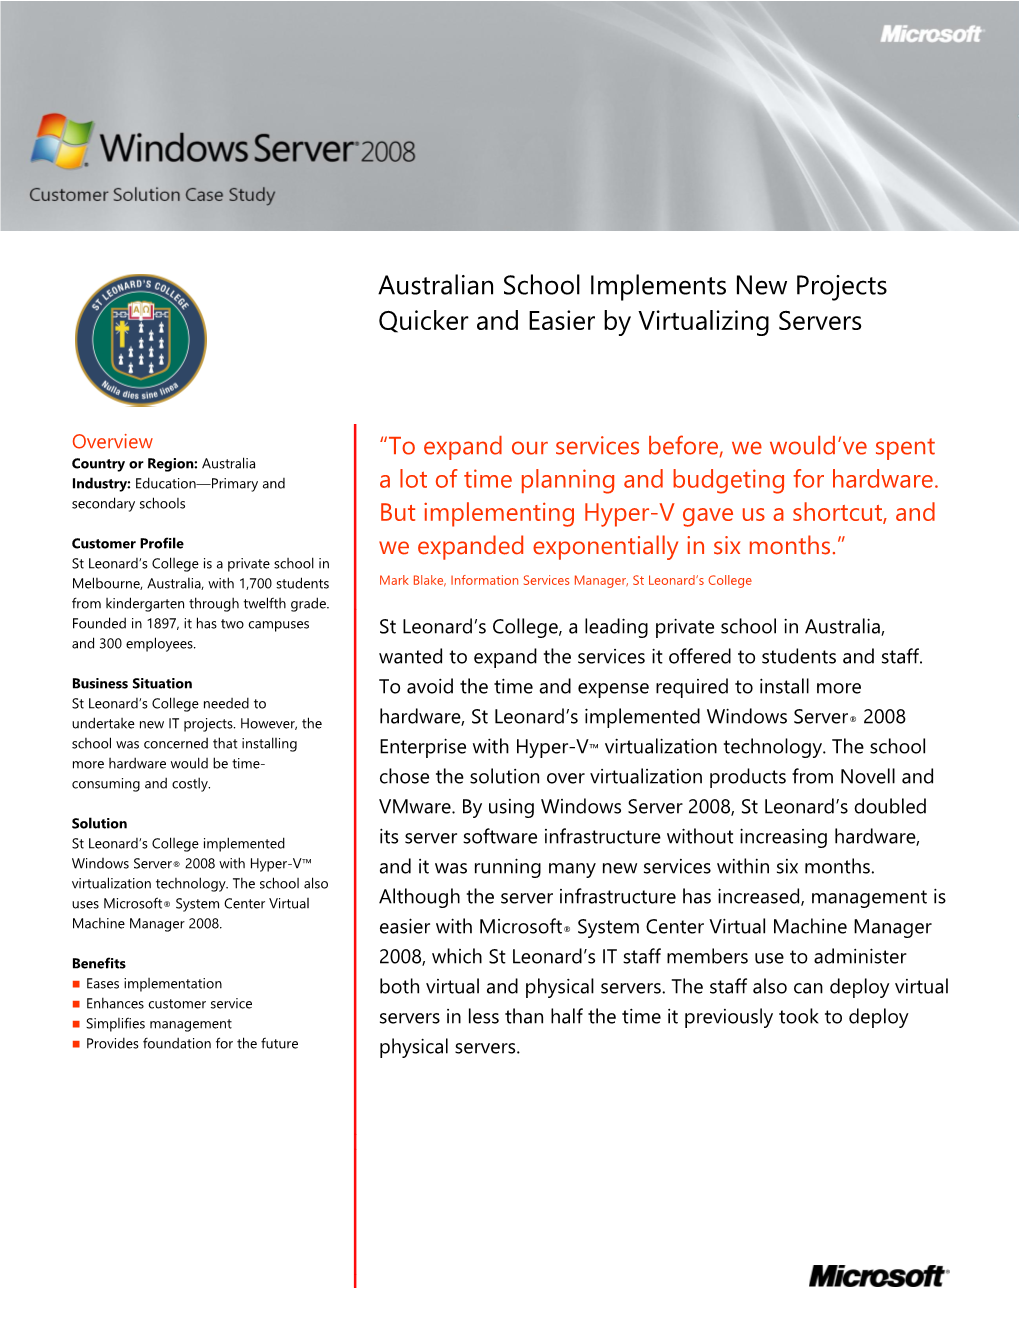 Australian School Implements New Projects Quicker and Easier by Virtualizing Servers